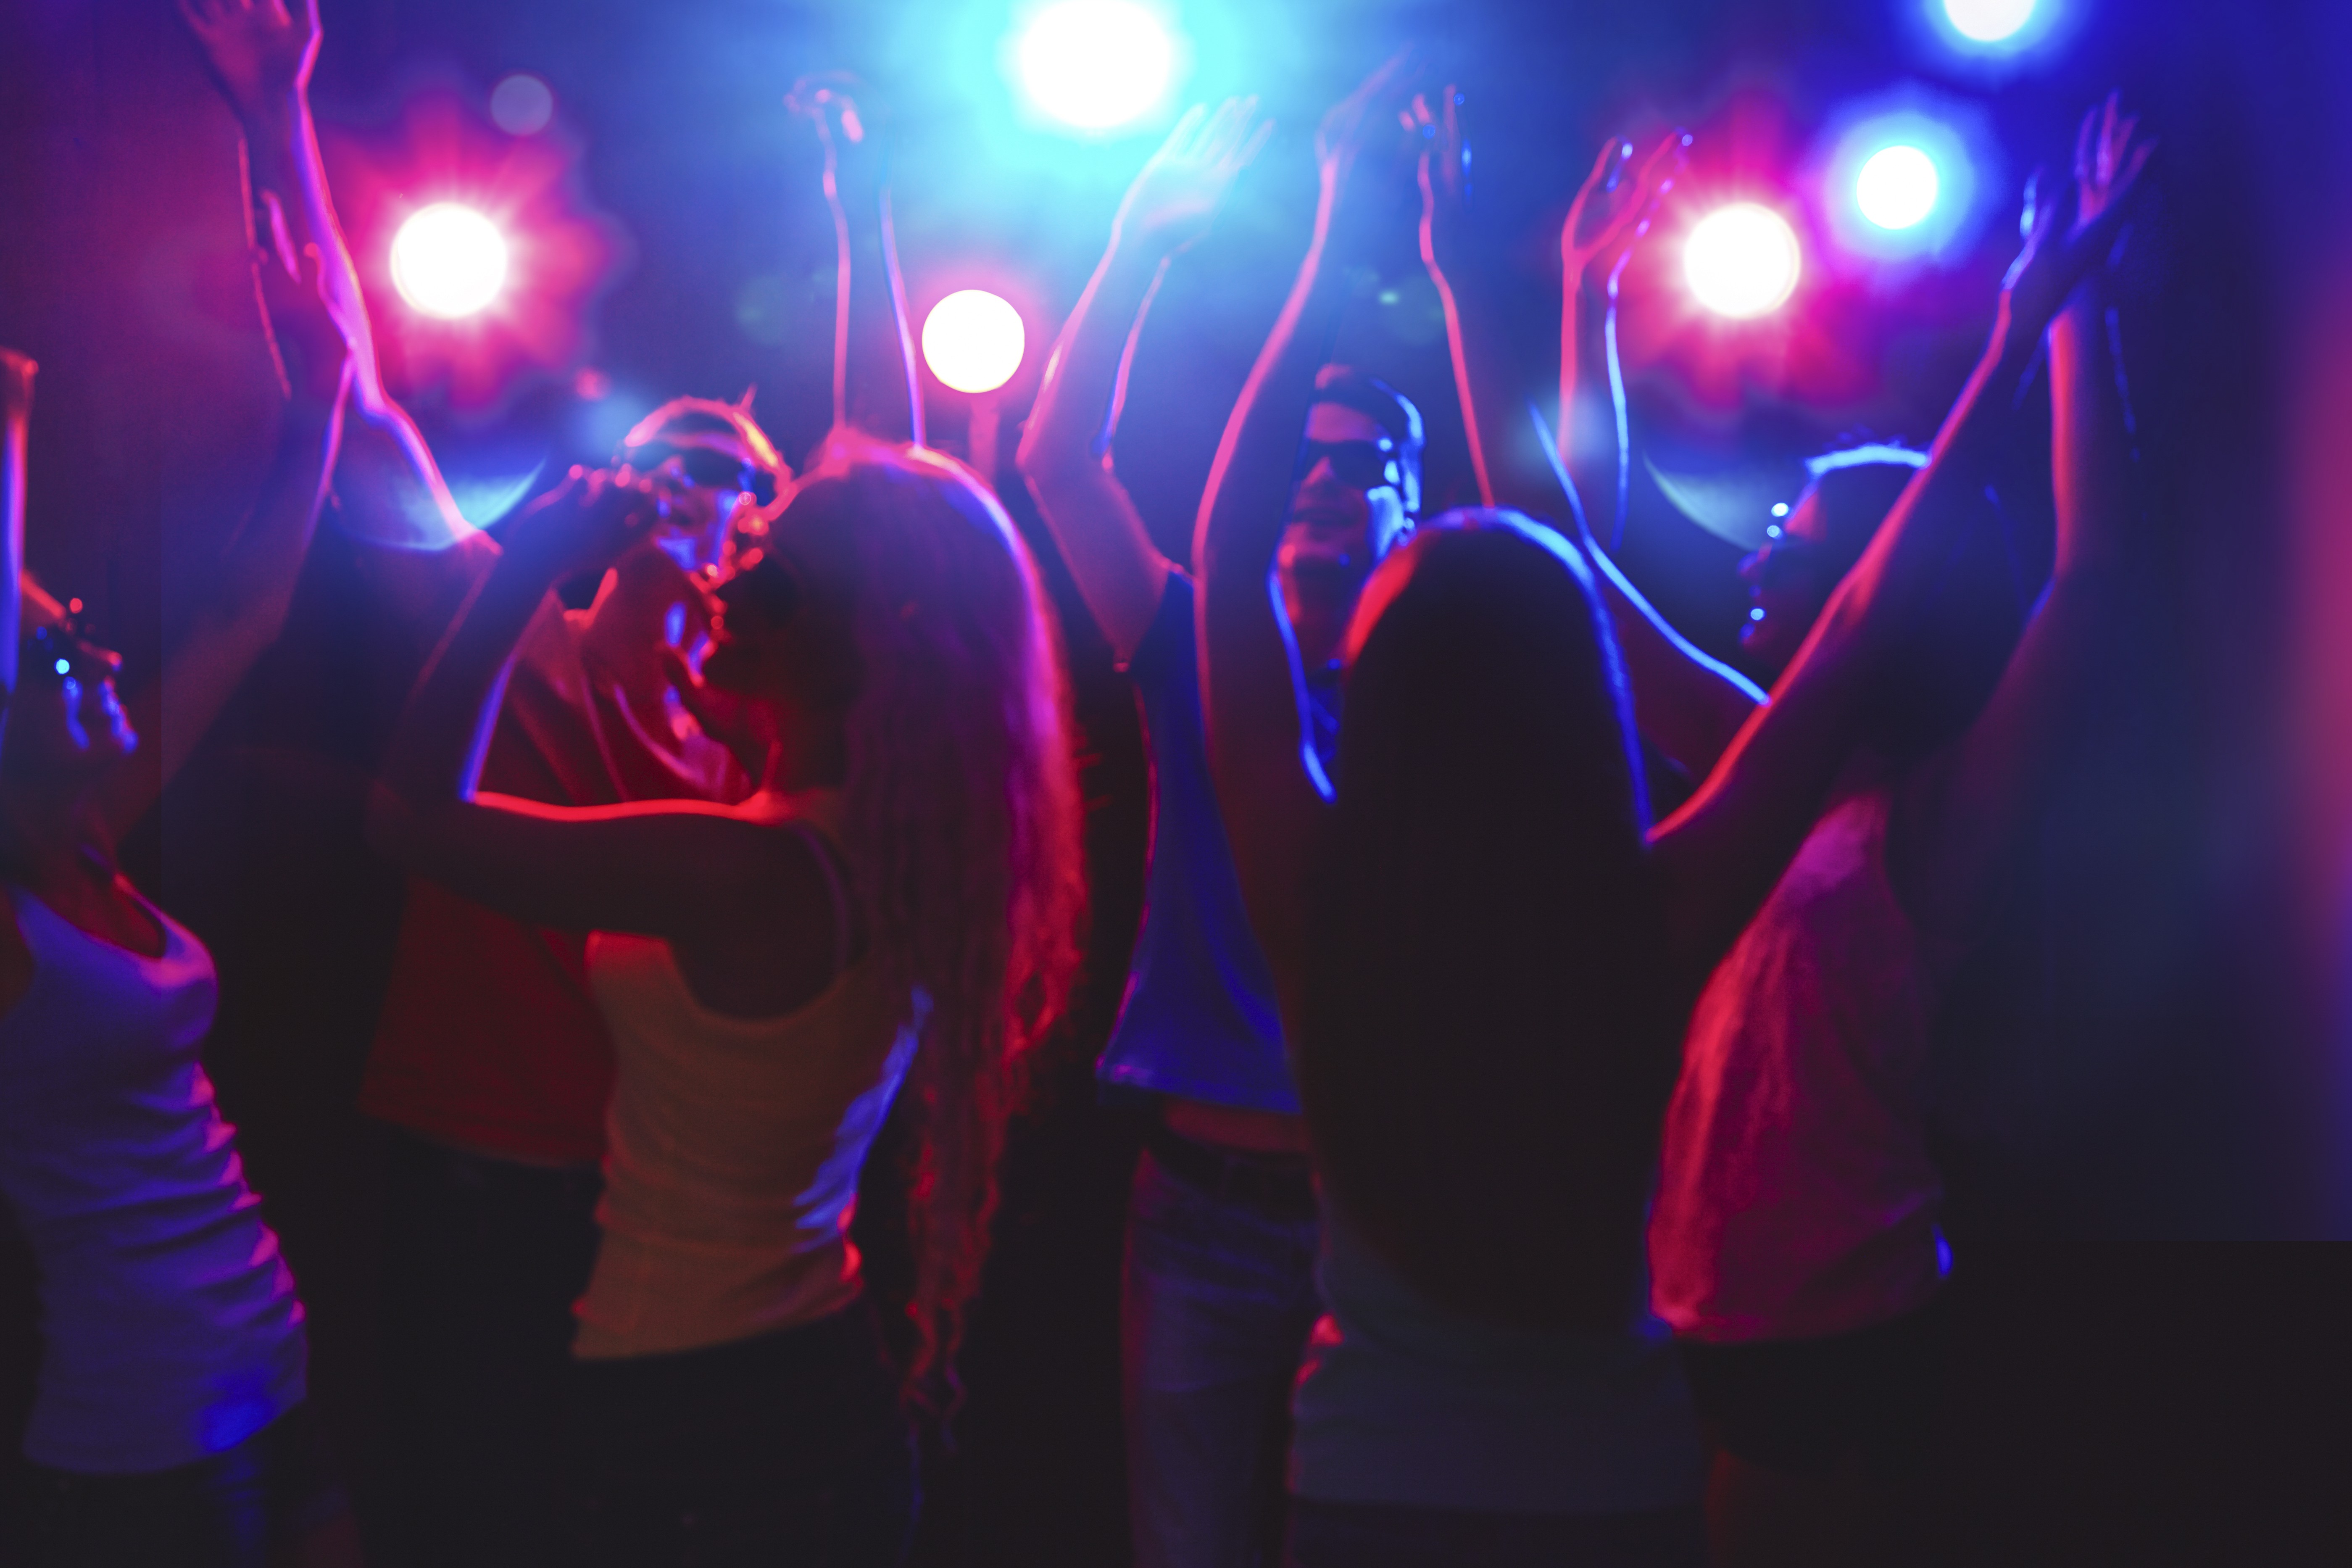 An increasing number of Hong Kong teenagers are drinking in nightclubs. Photo: Shutterstock